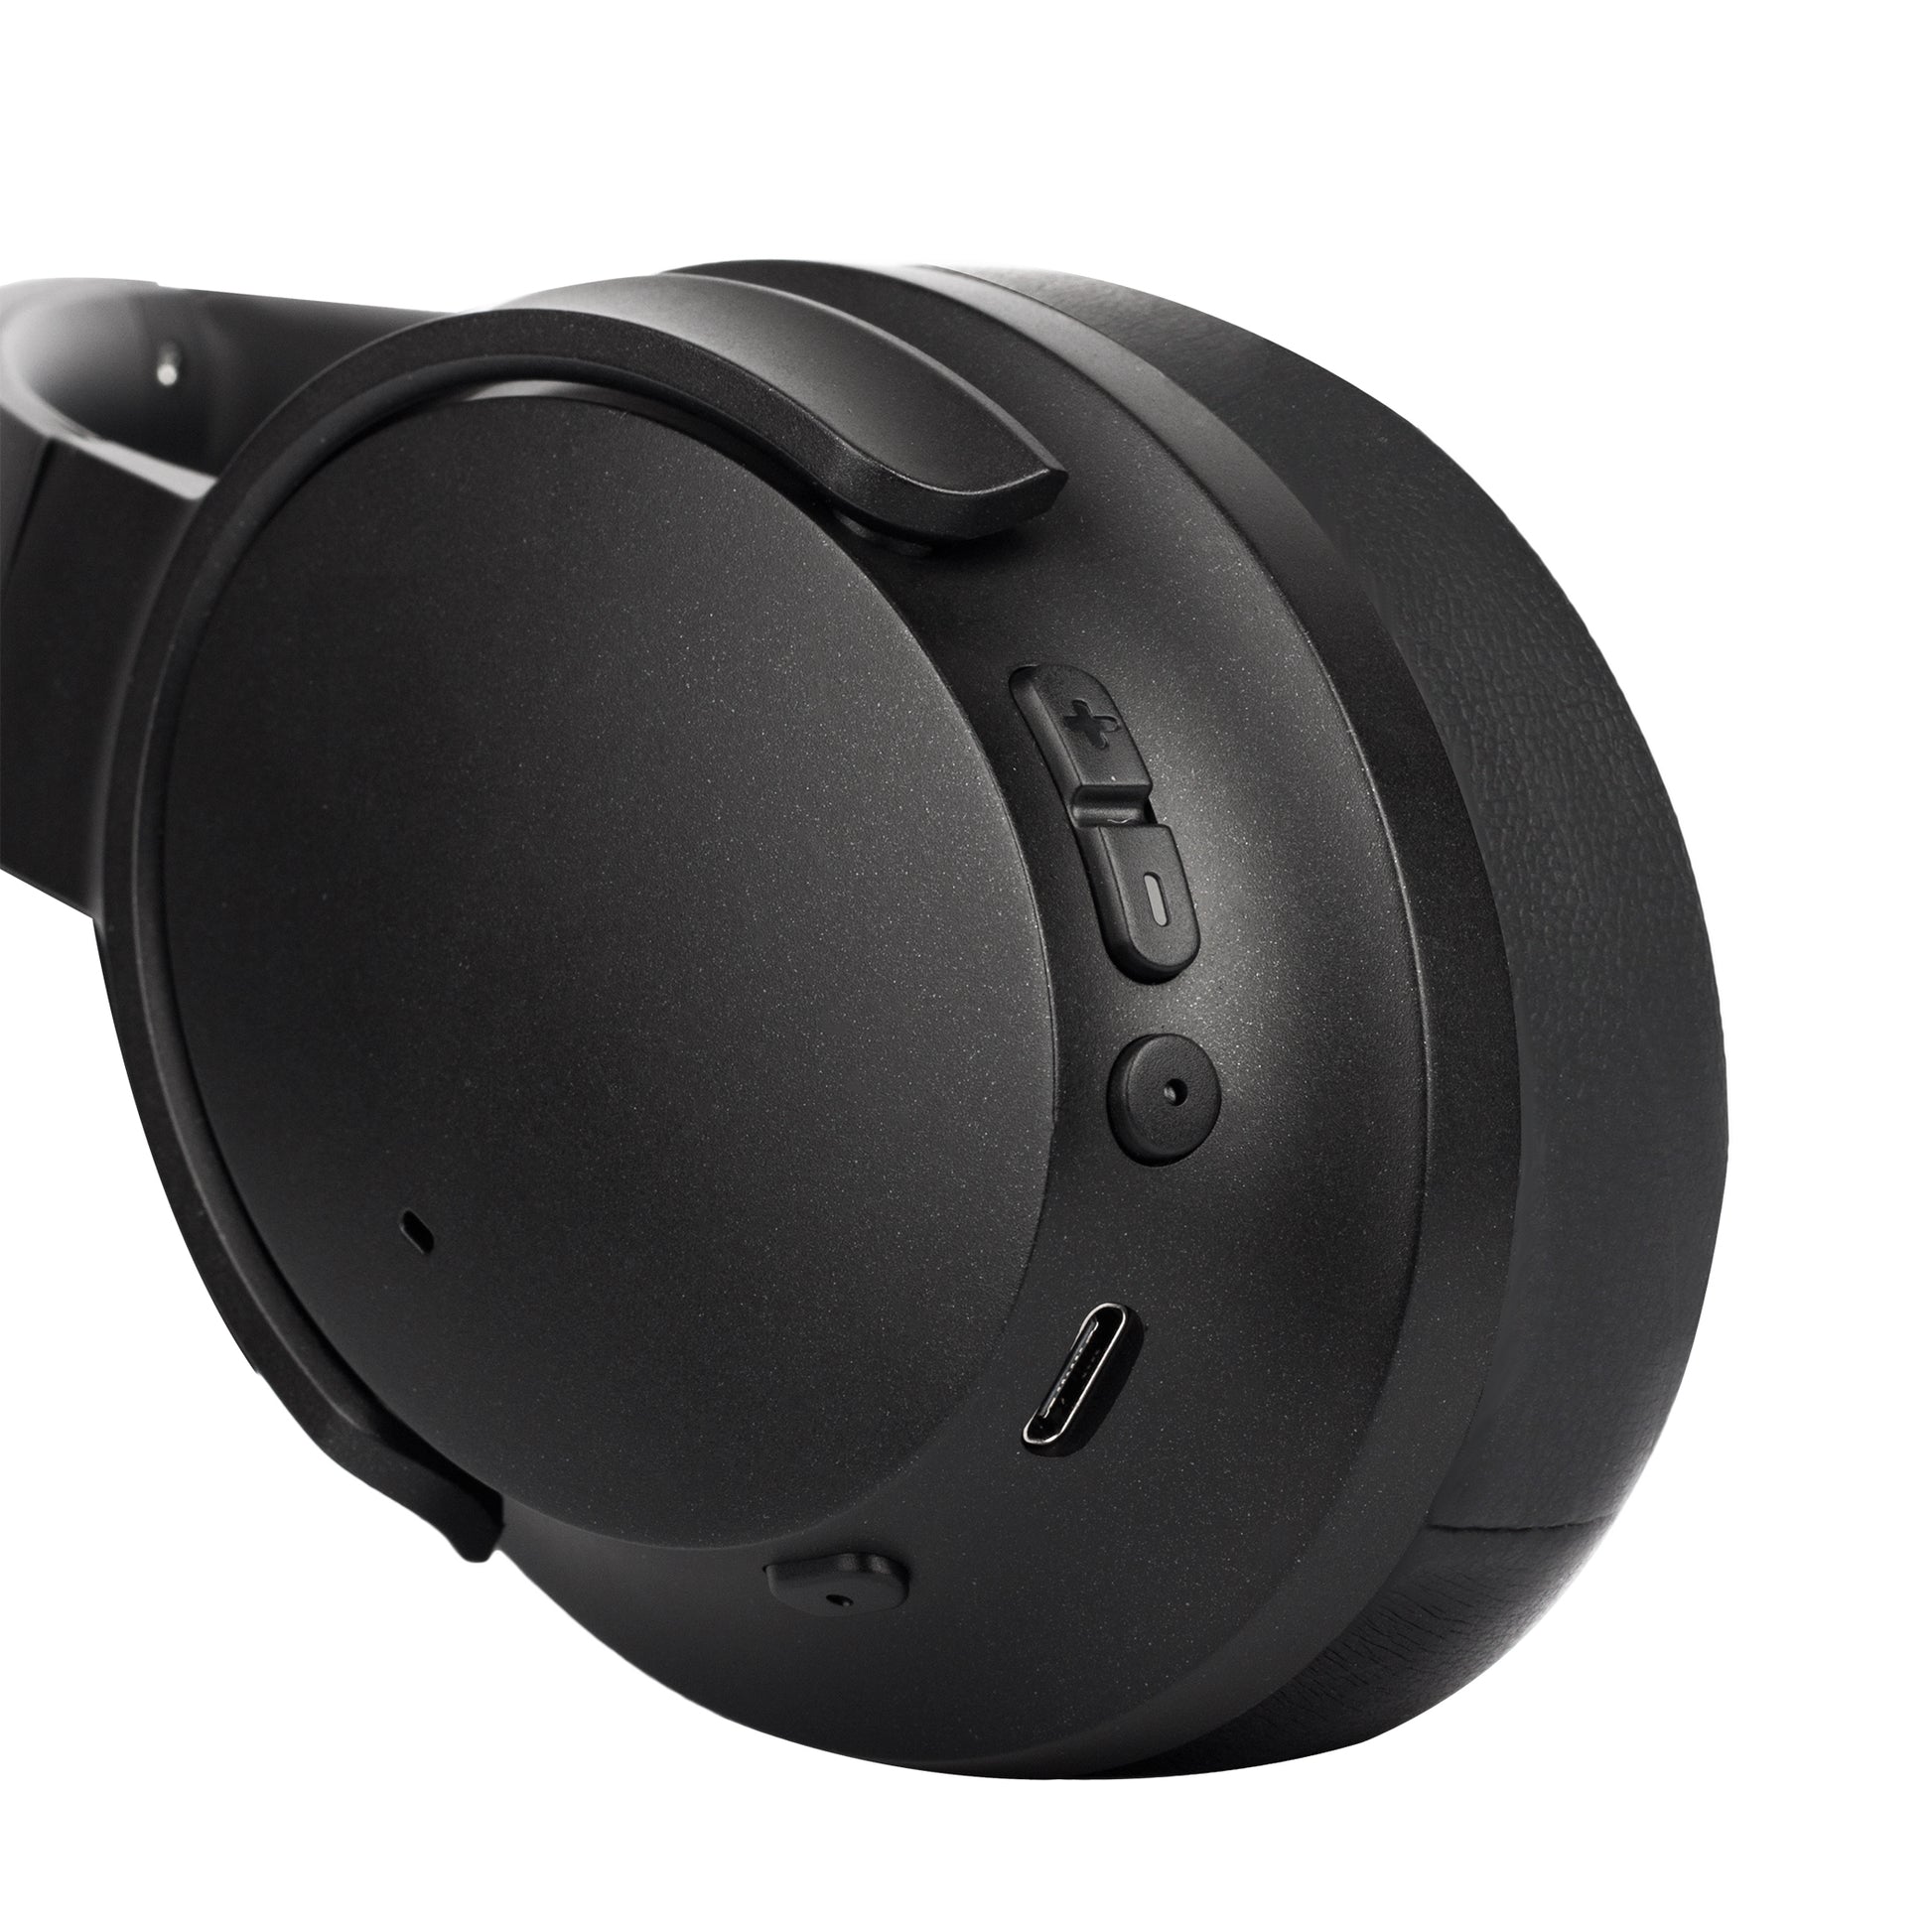 Photo of Morpheus 360 Synergy HD Active Noise Cancelling Wireless Headphone, showing Power on/off button, Volume up/down buttons, Noise cancelling button, and USB Type-C cable port on the headphones ear piece.